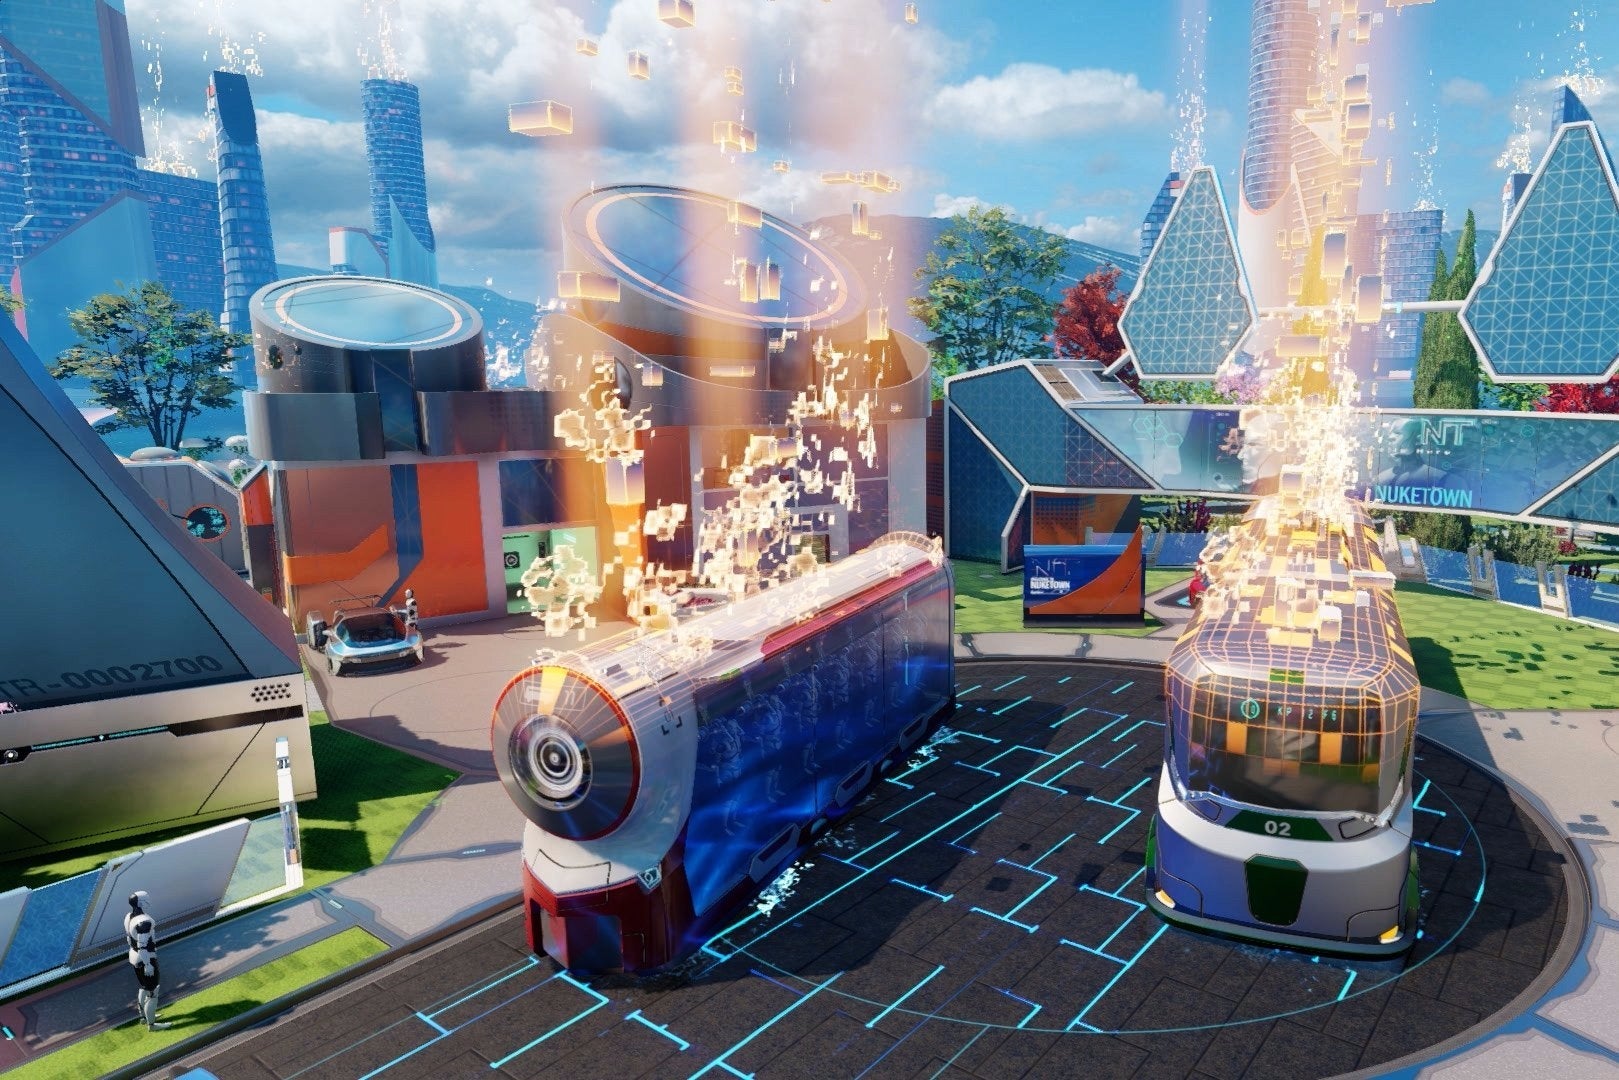 Image for Call of Duty: Black Ops 3's Nuketown map now free for all